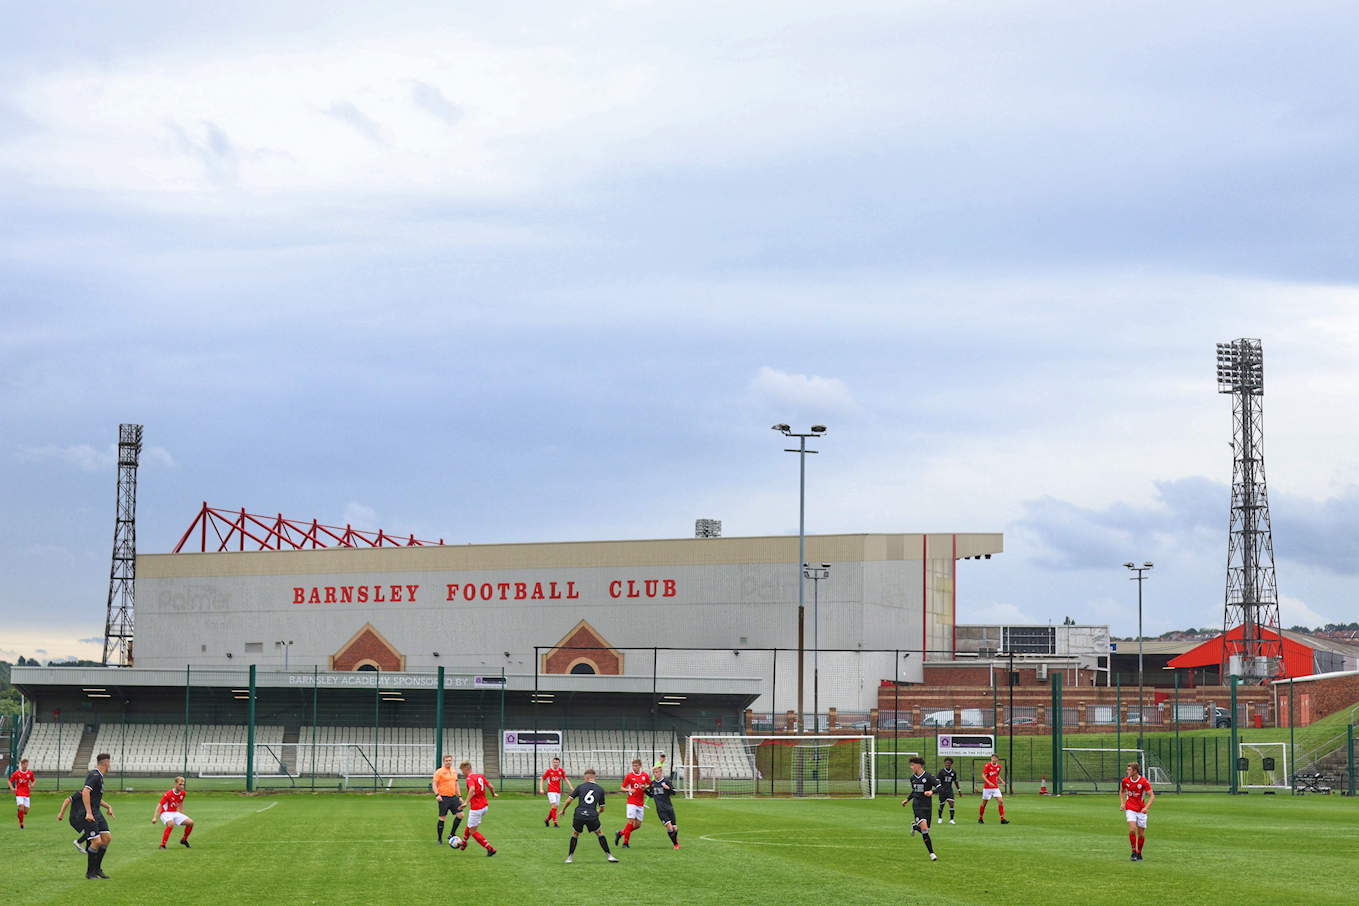 Our U18s in action at the Oakwell Training Ground